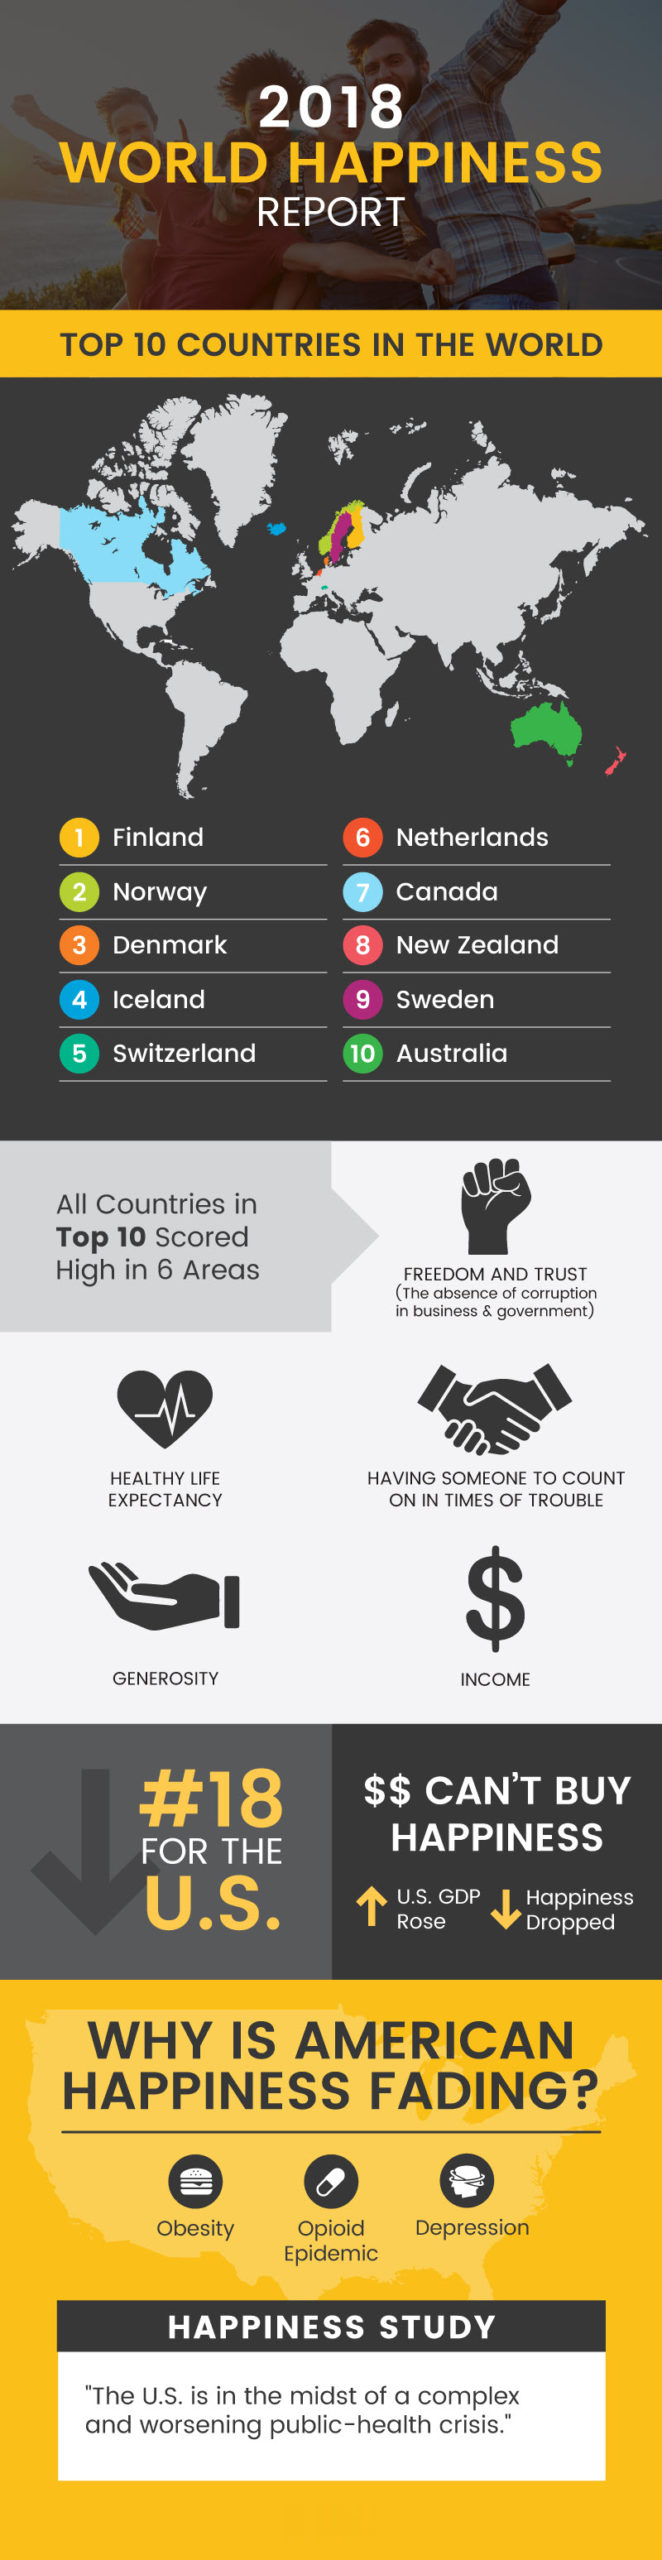 Happiness report infographic